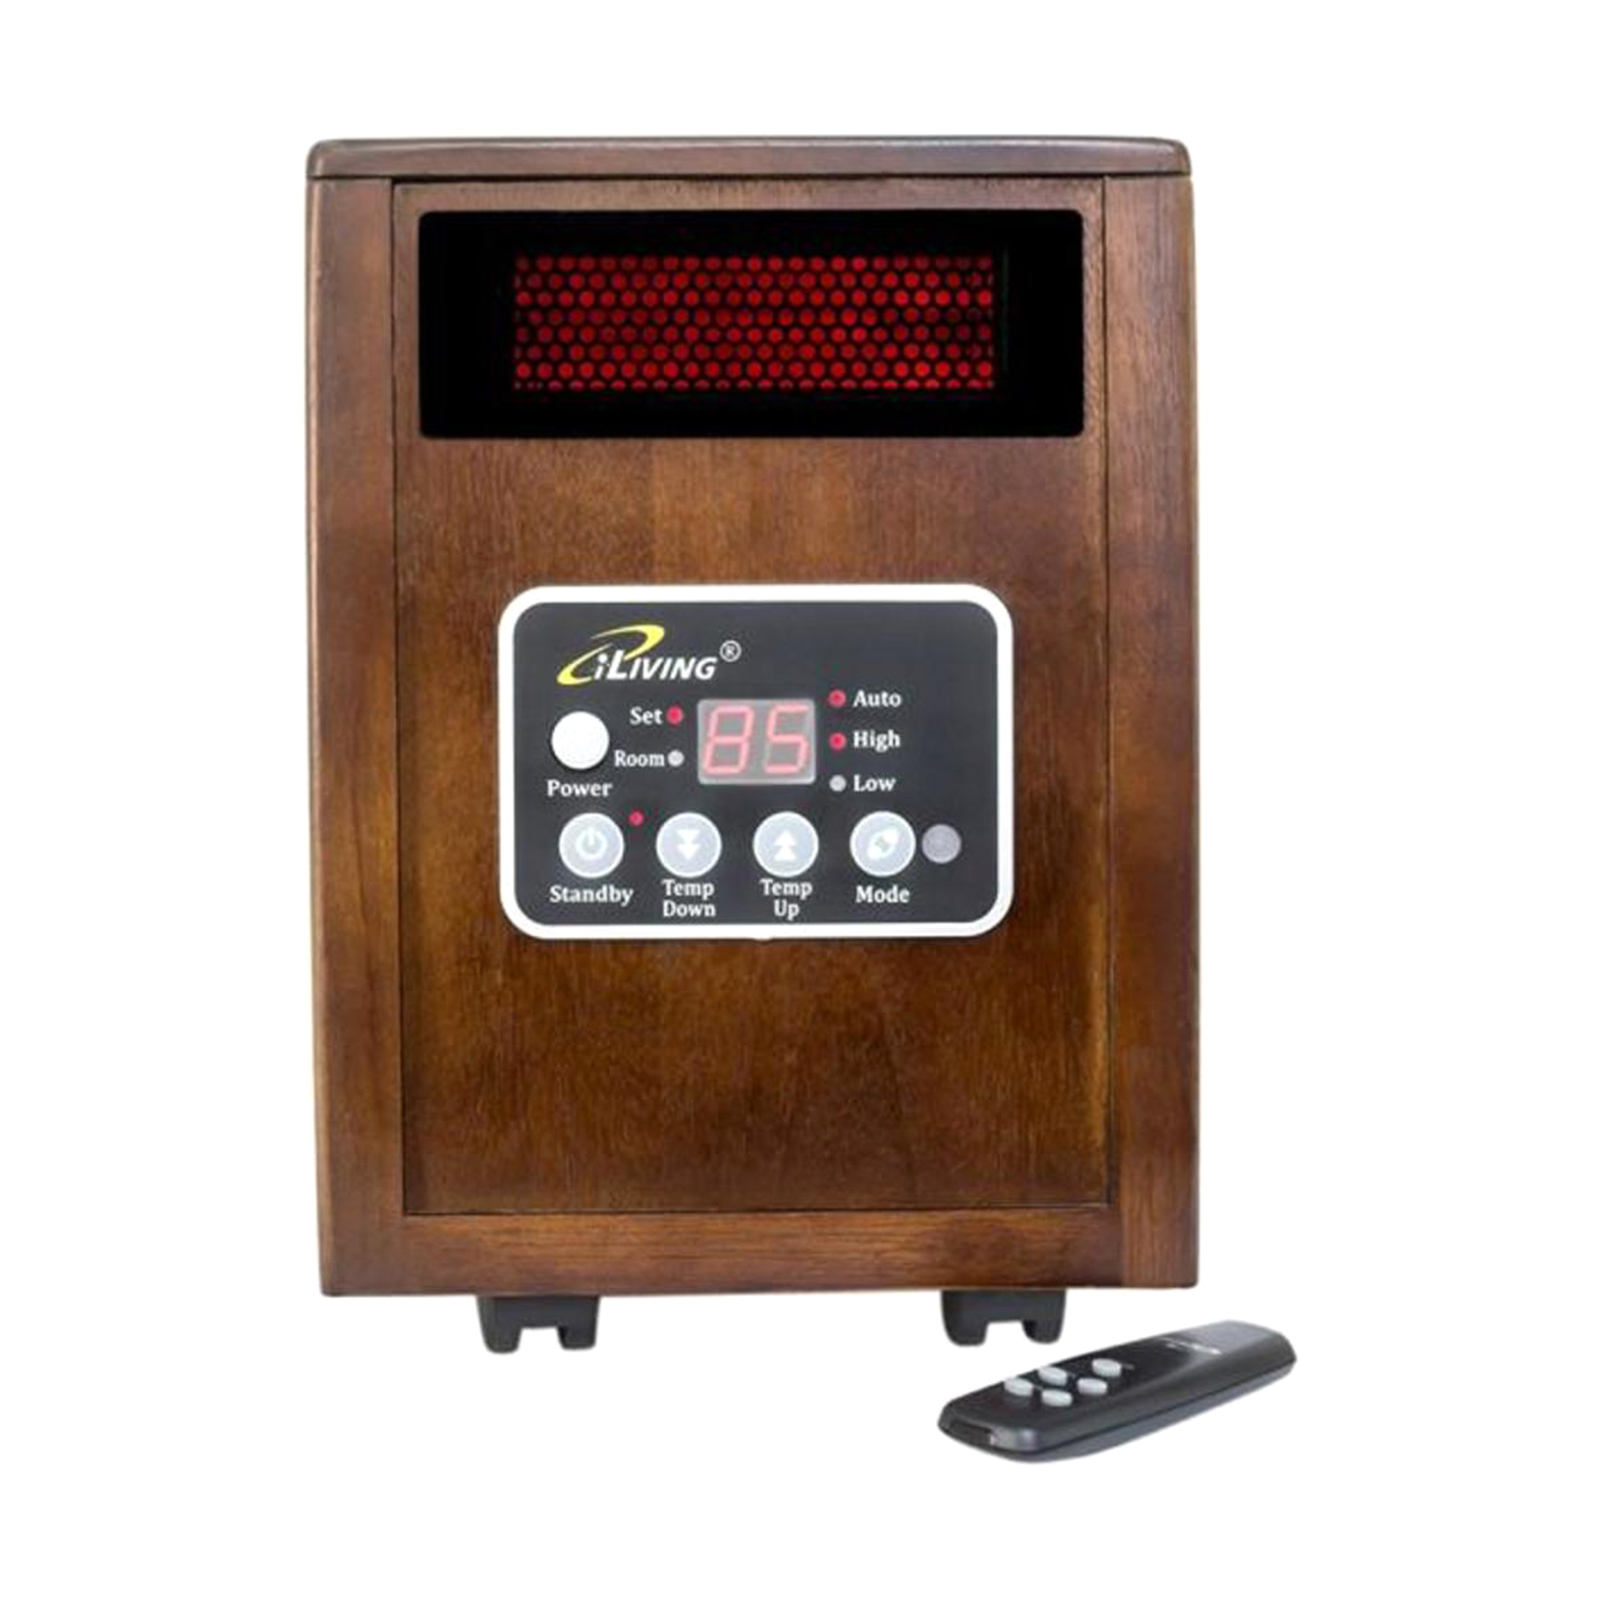 iLIVING ILG-918 5200BTU Infrared Portable Space Heater with Remote Control